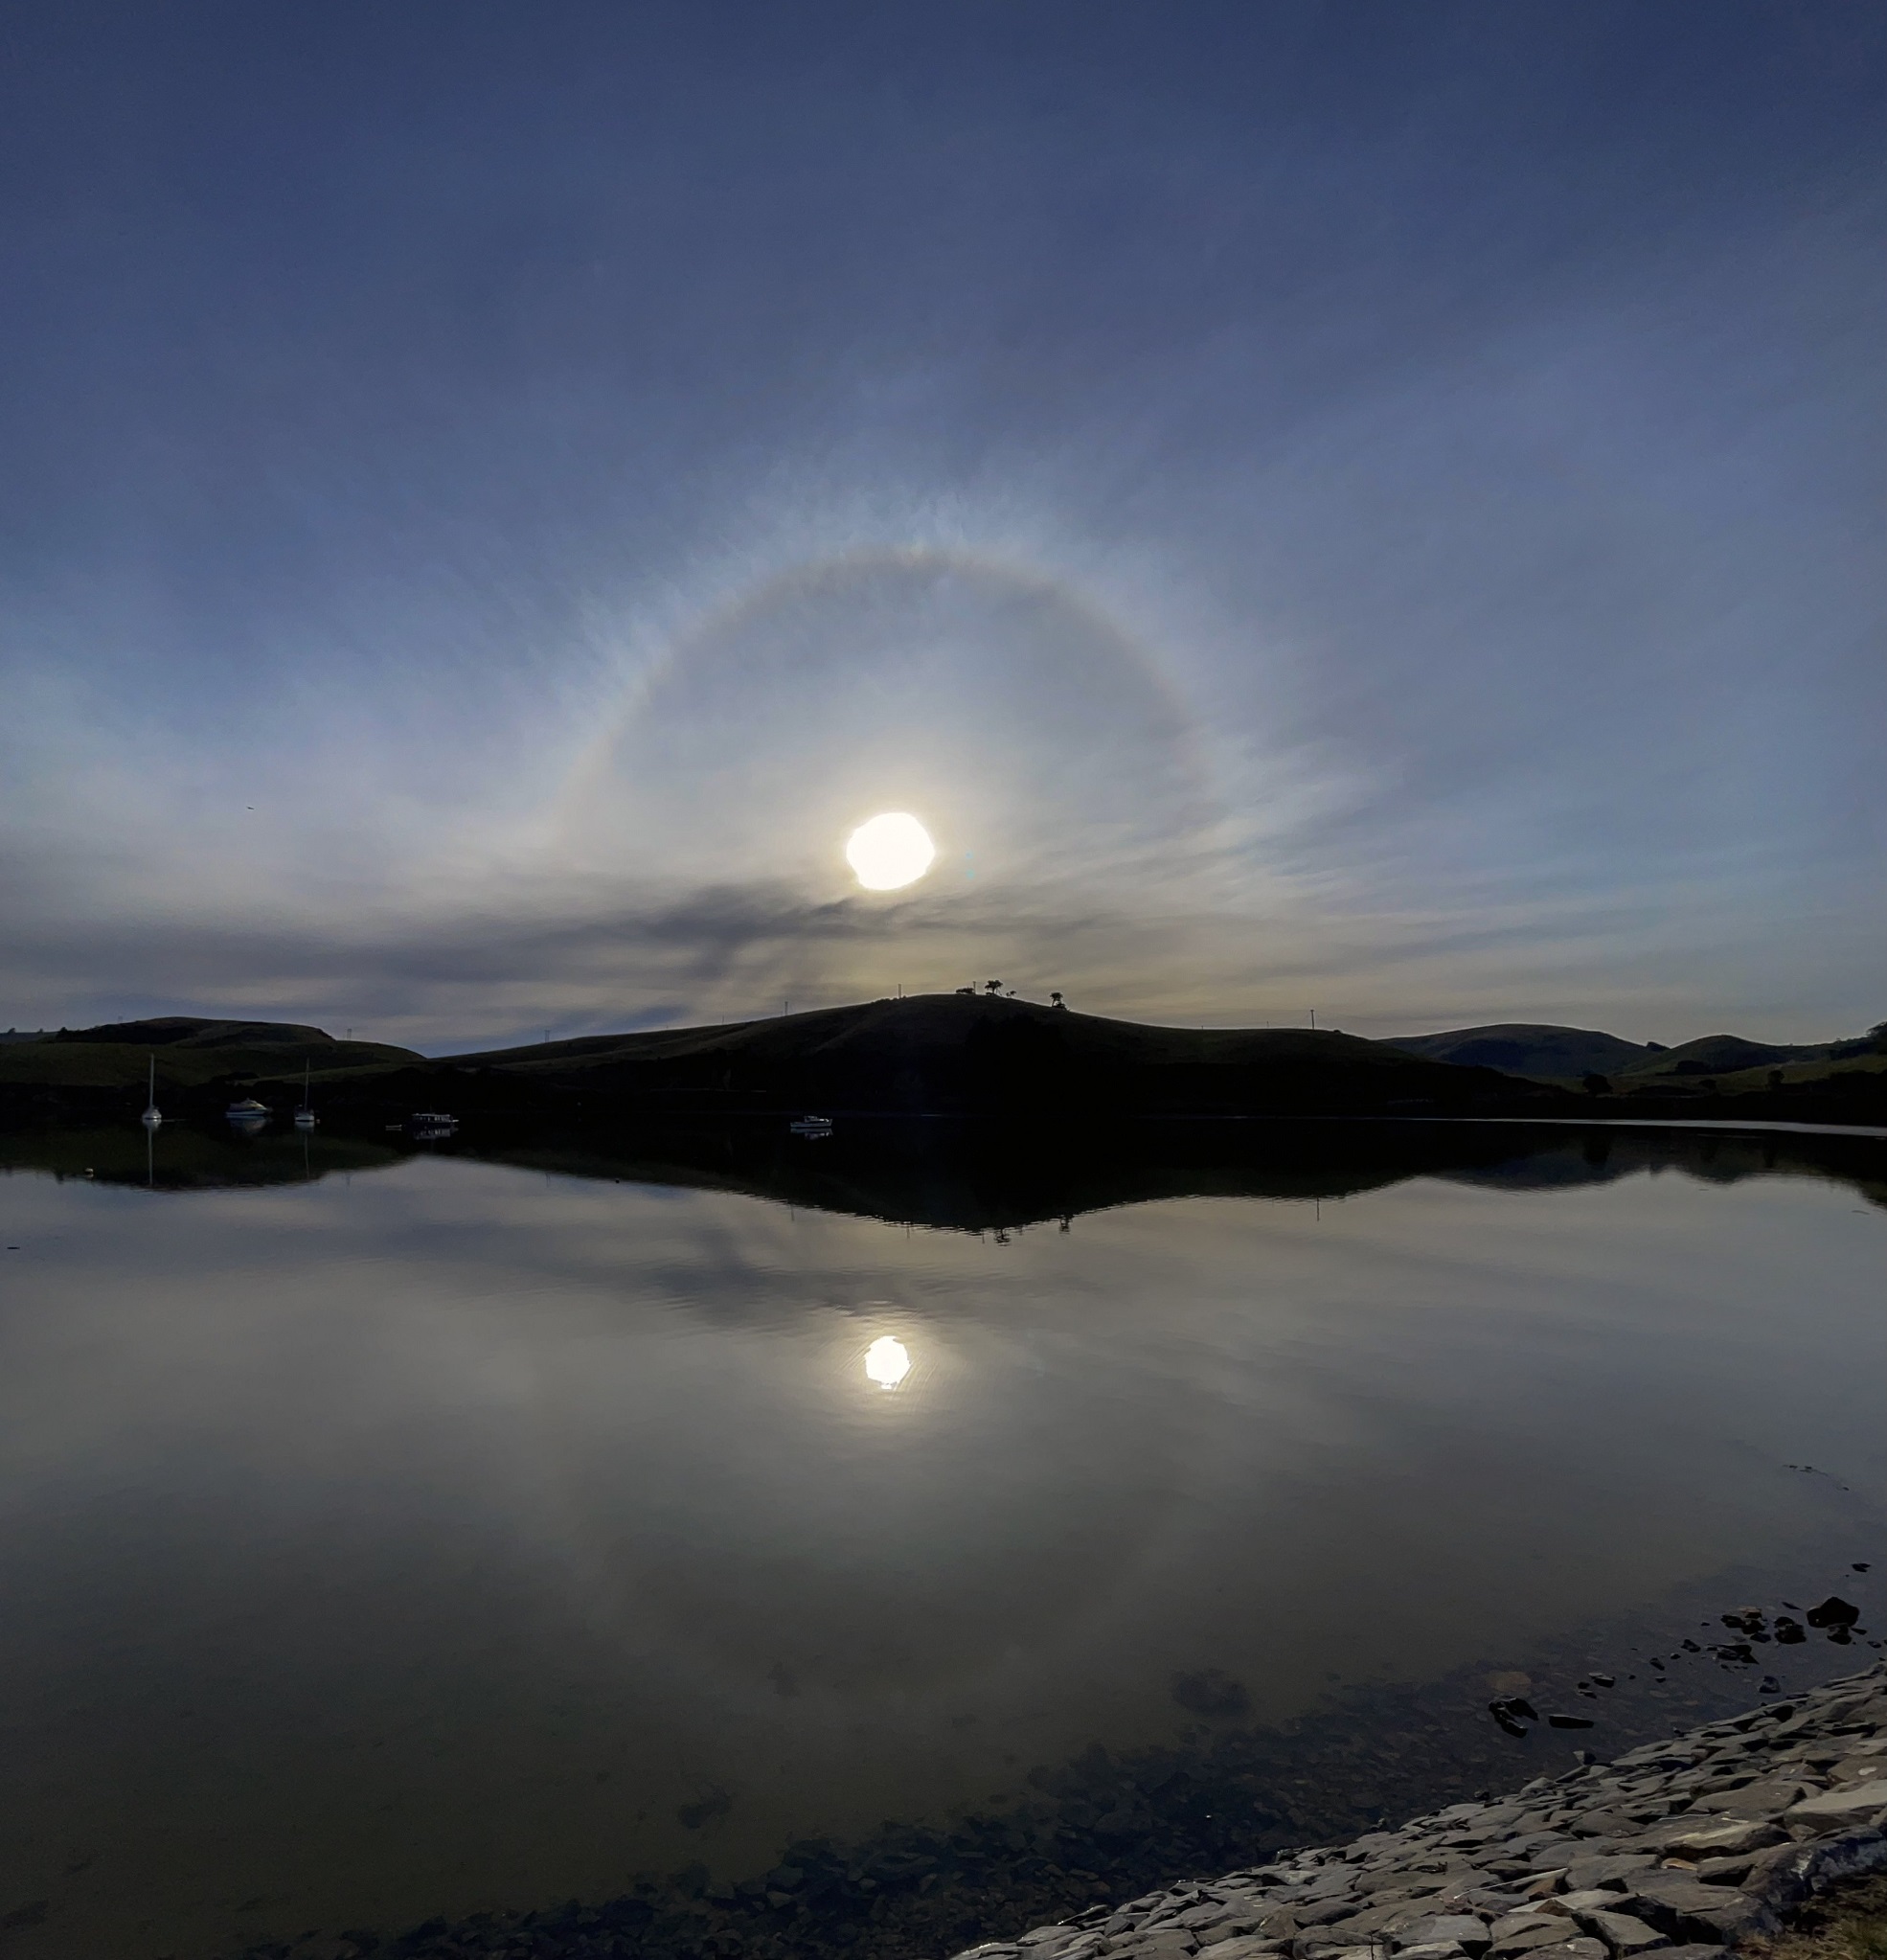 The 22° halo is reflected in the water at Portobello. Photo: Ian Griffin